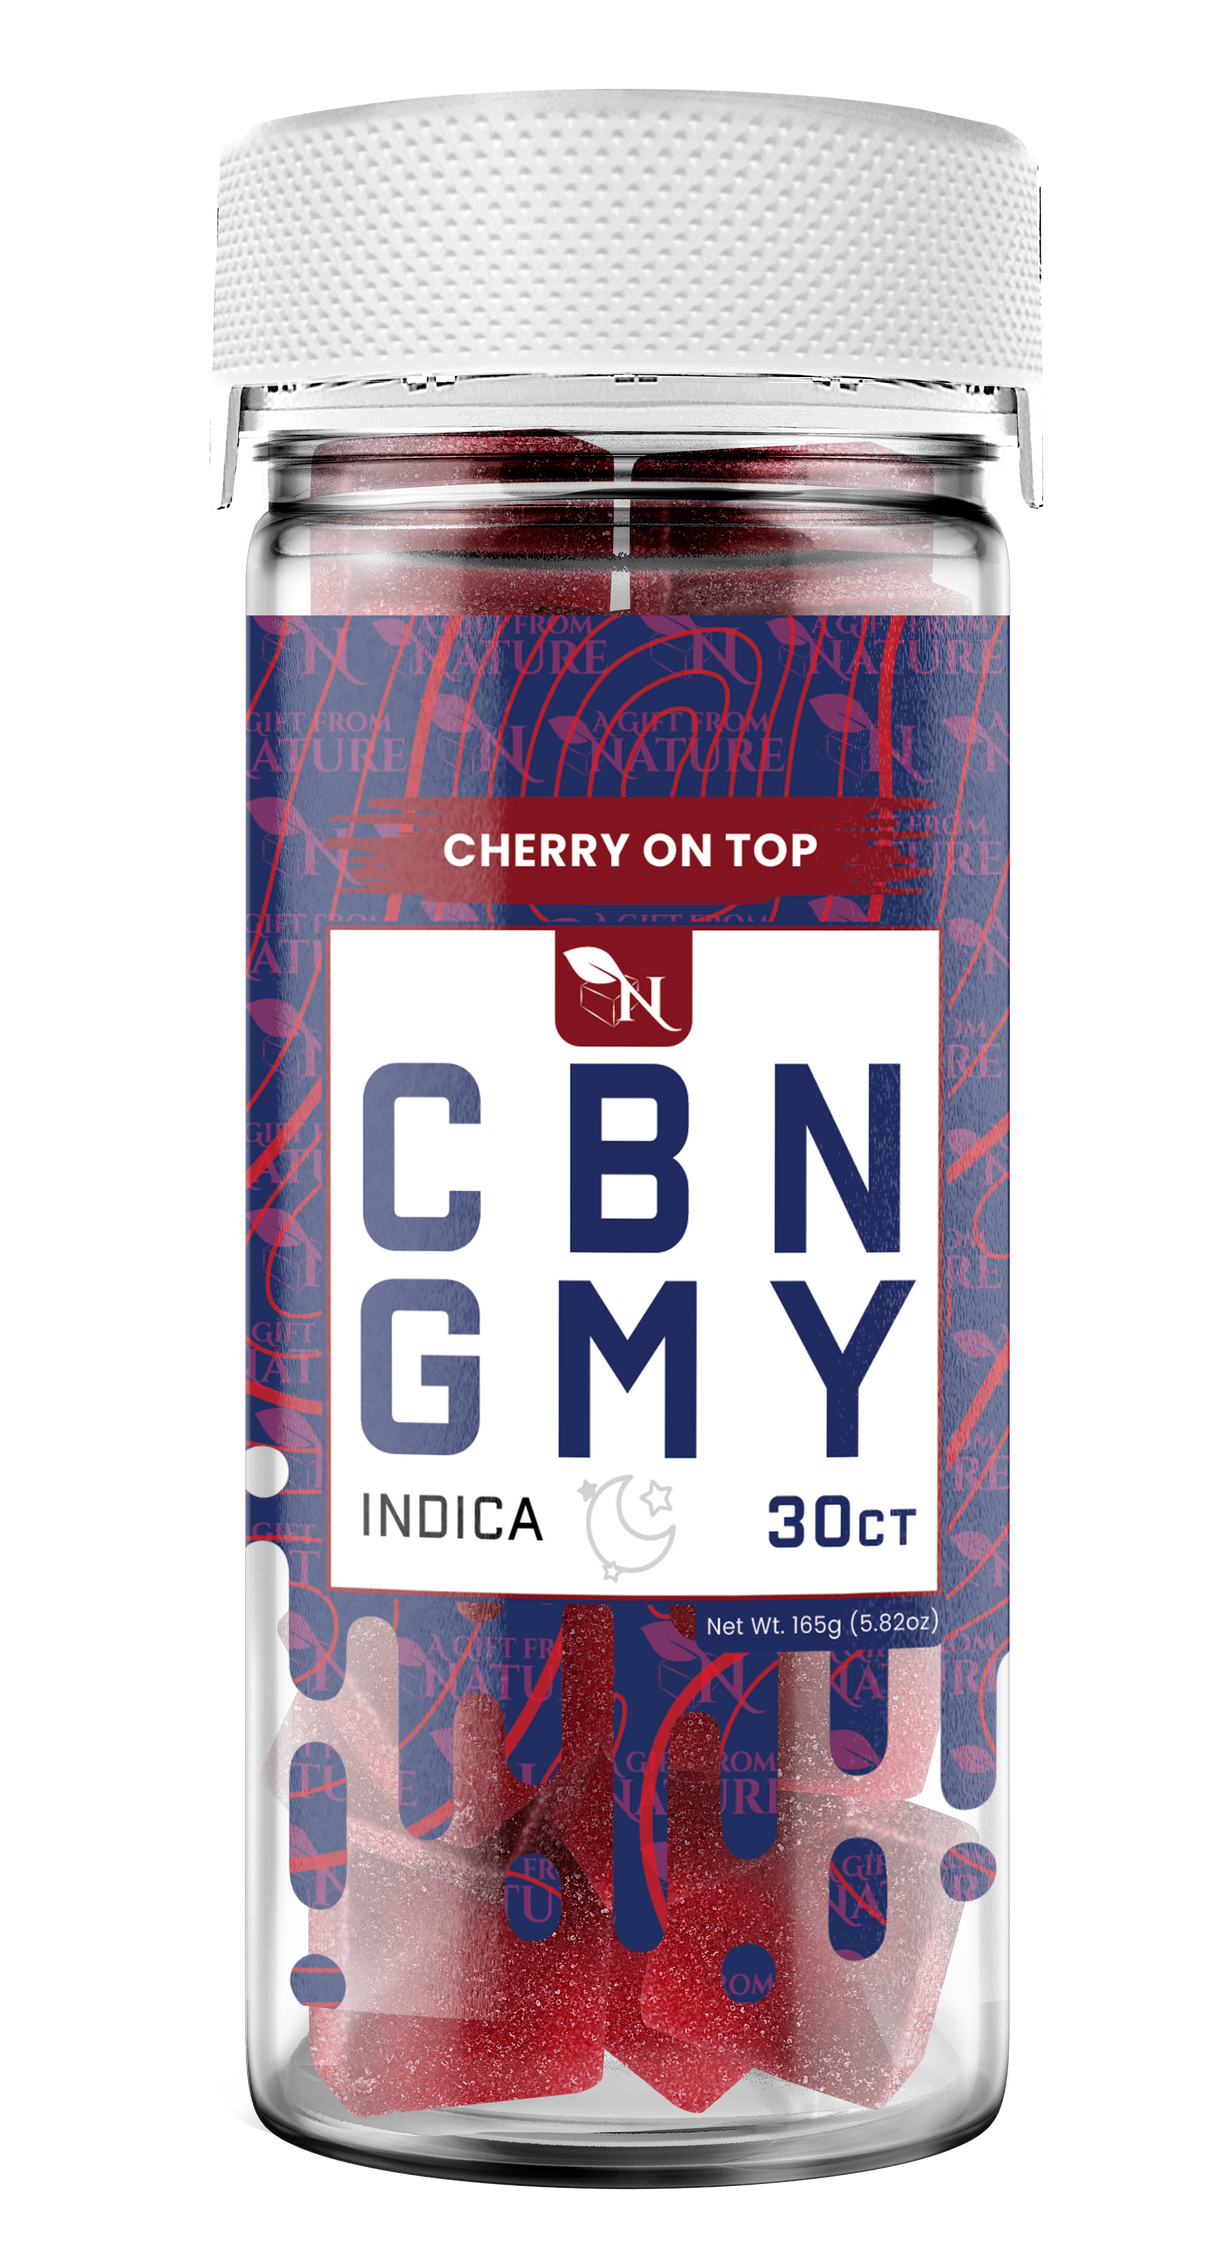 AGFN CBN Gummy: Cherry On Top Indica (1500MG)